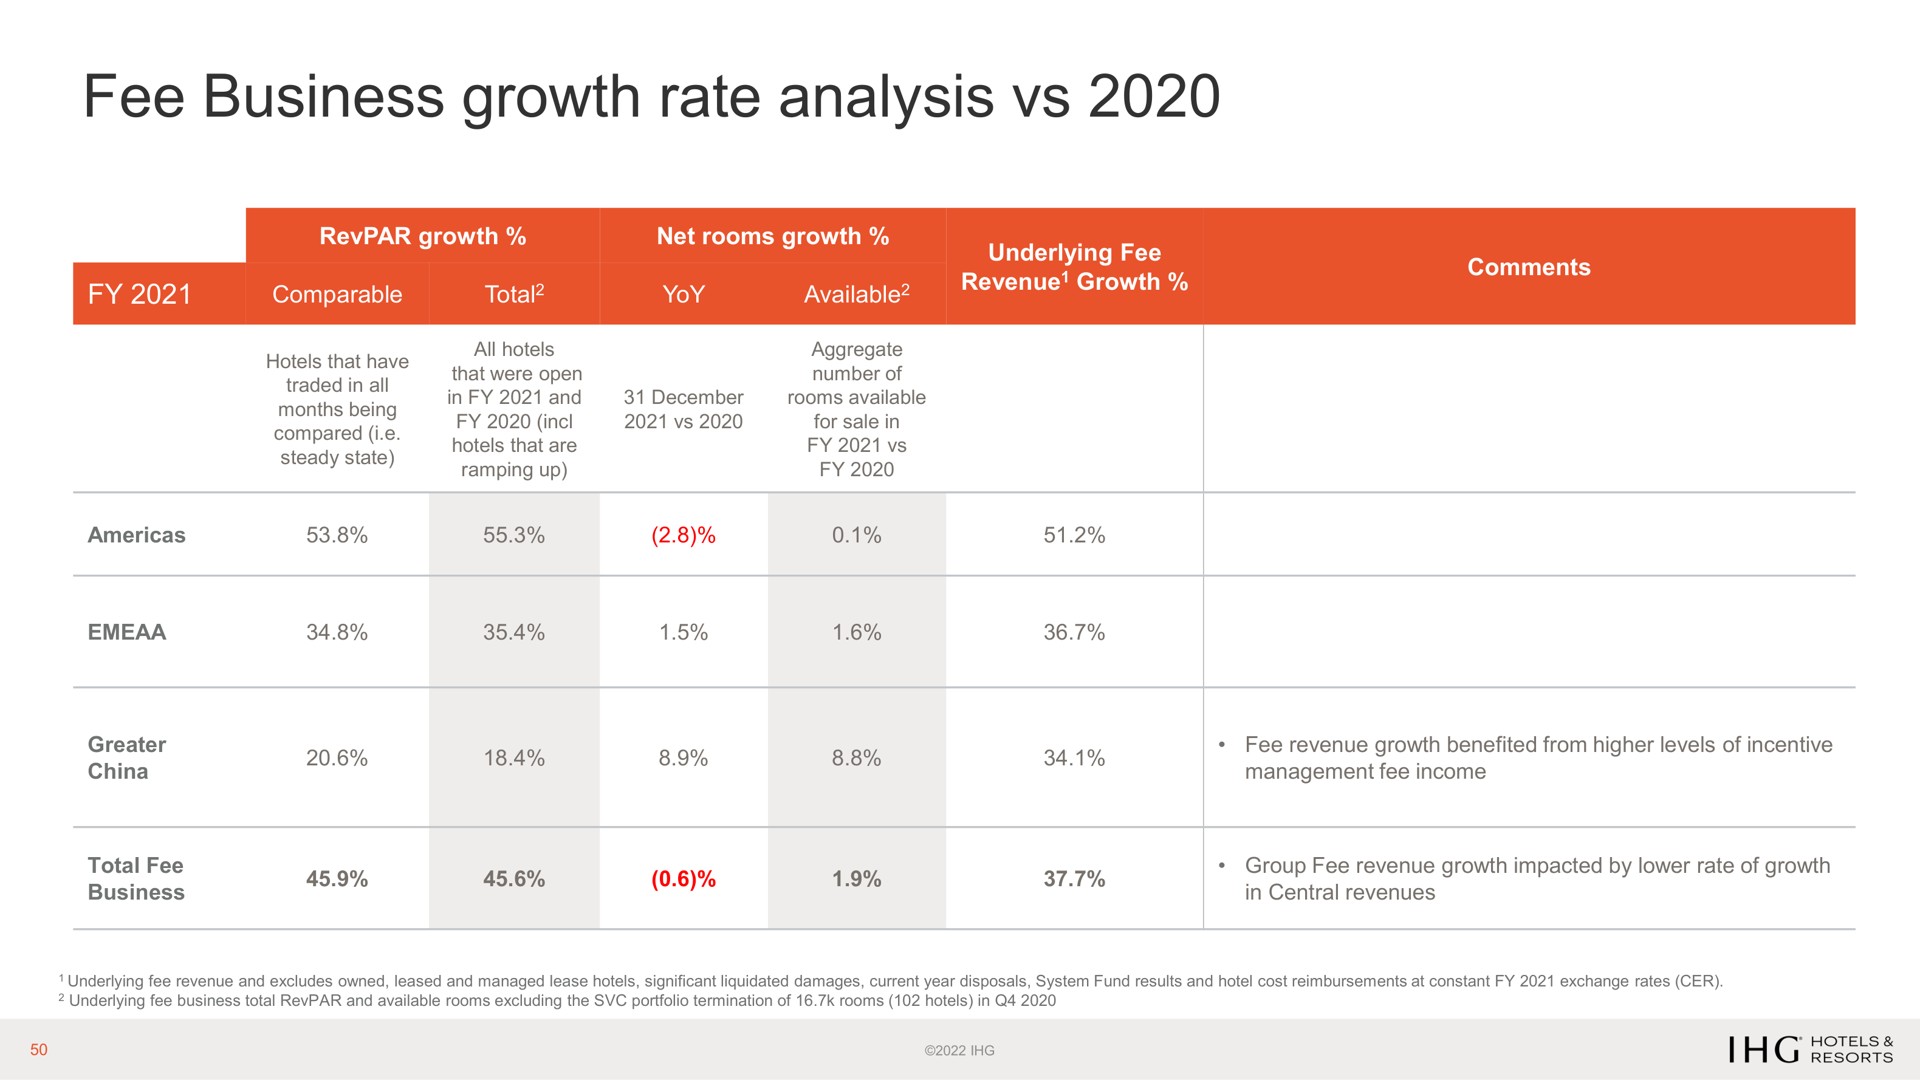 fee business growth rate analysis | IHG Hotels